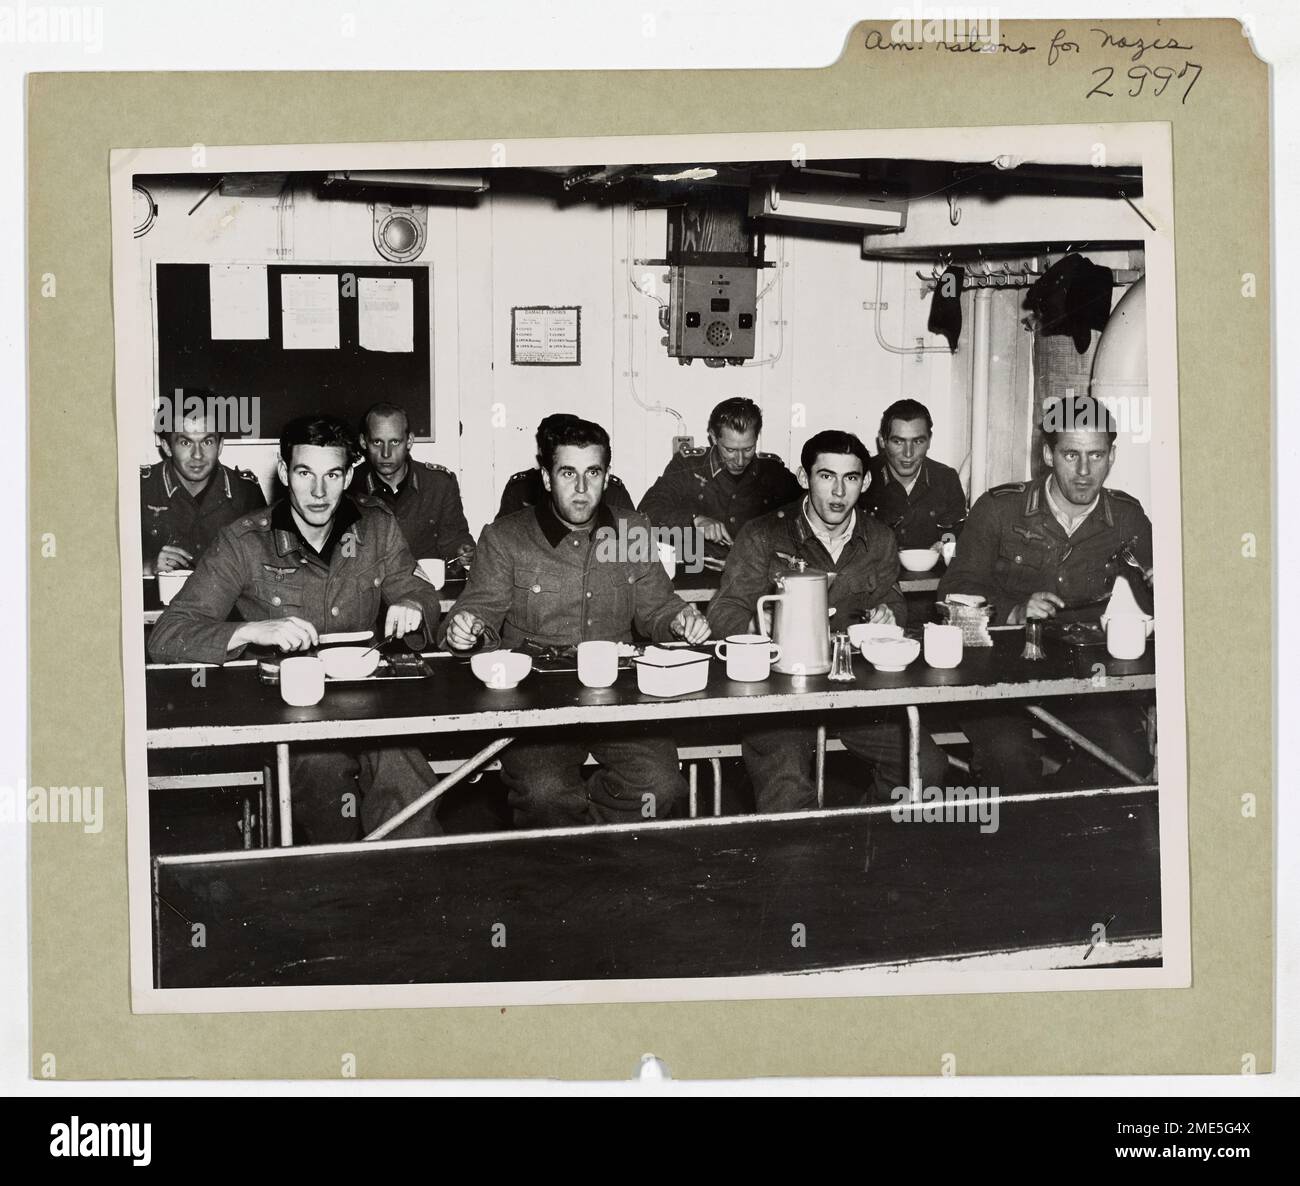 American Rations Taste Good To Nazis Captured in Surprise Greenland Attack. This image depicts Nazi prisoners of war brighten up a bit when they sit down to American Rations after being captured in a surprise Greenland action. Stock Photo